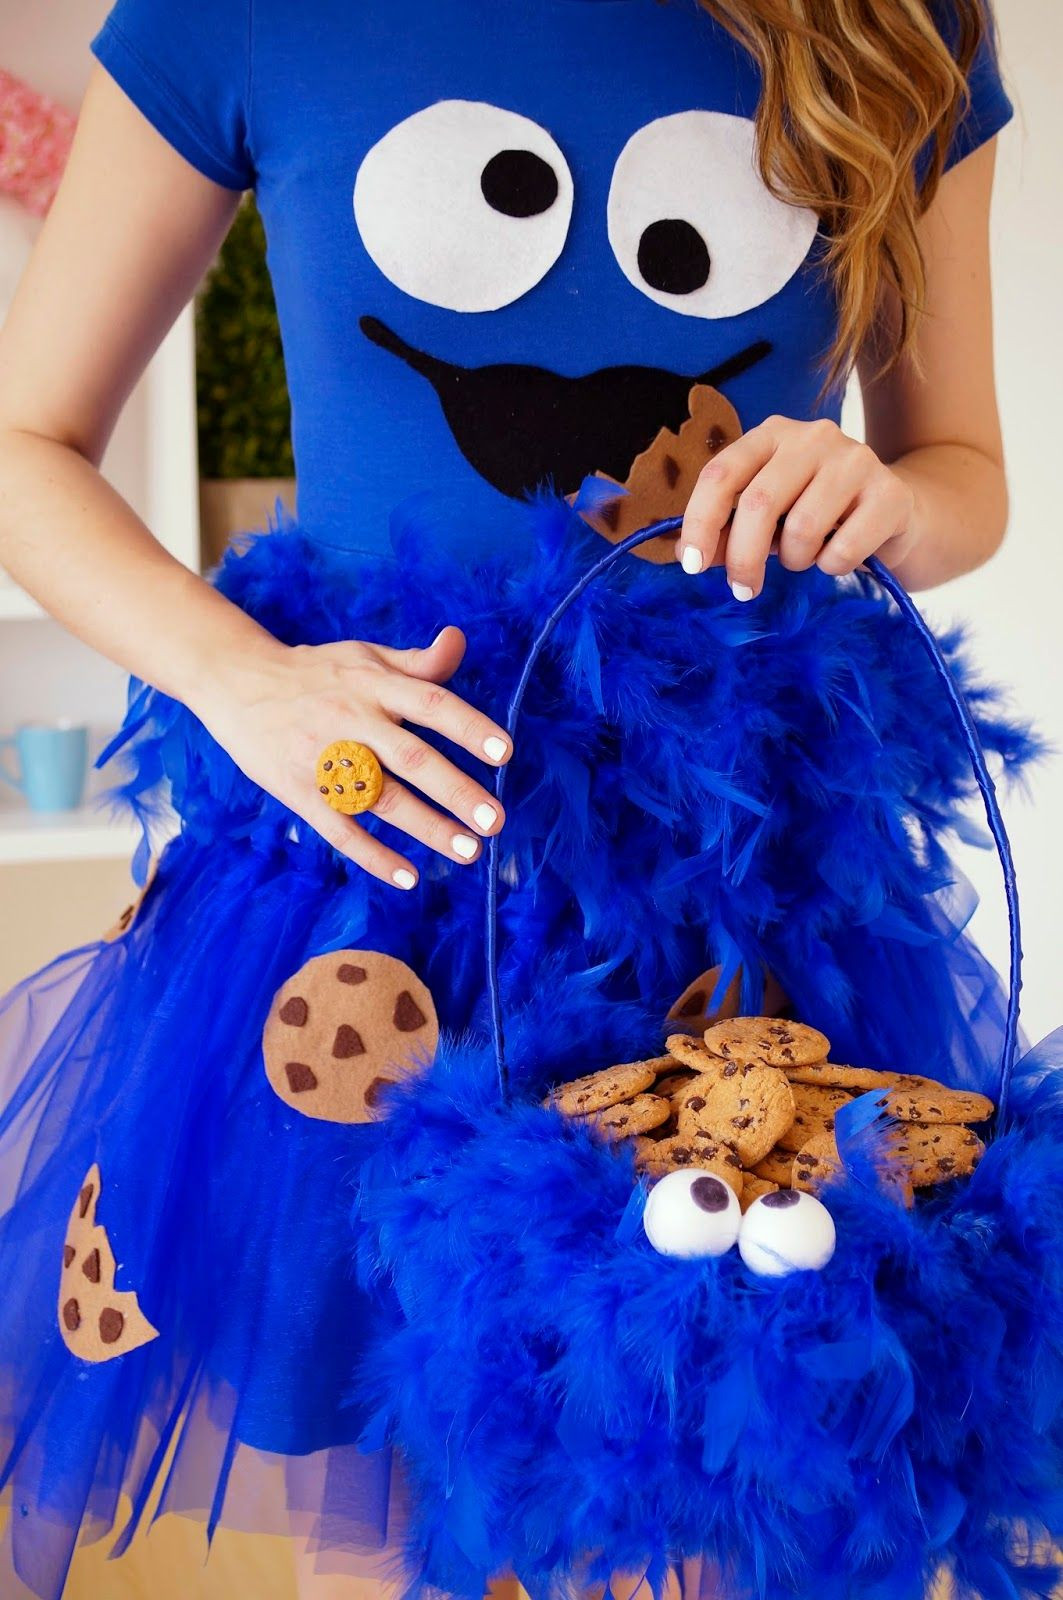 DIY Cookie Monster Costume
 cookie monster costumes and cookie